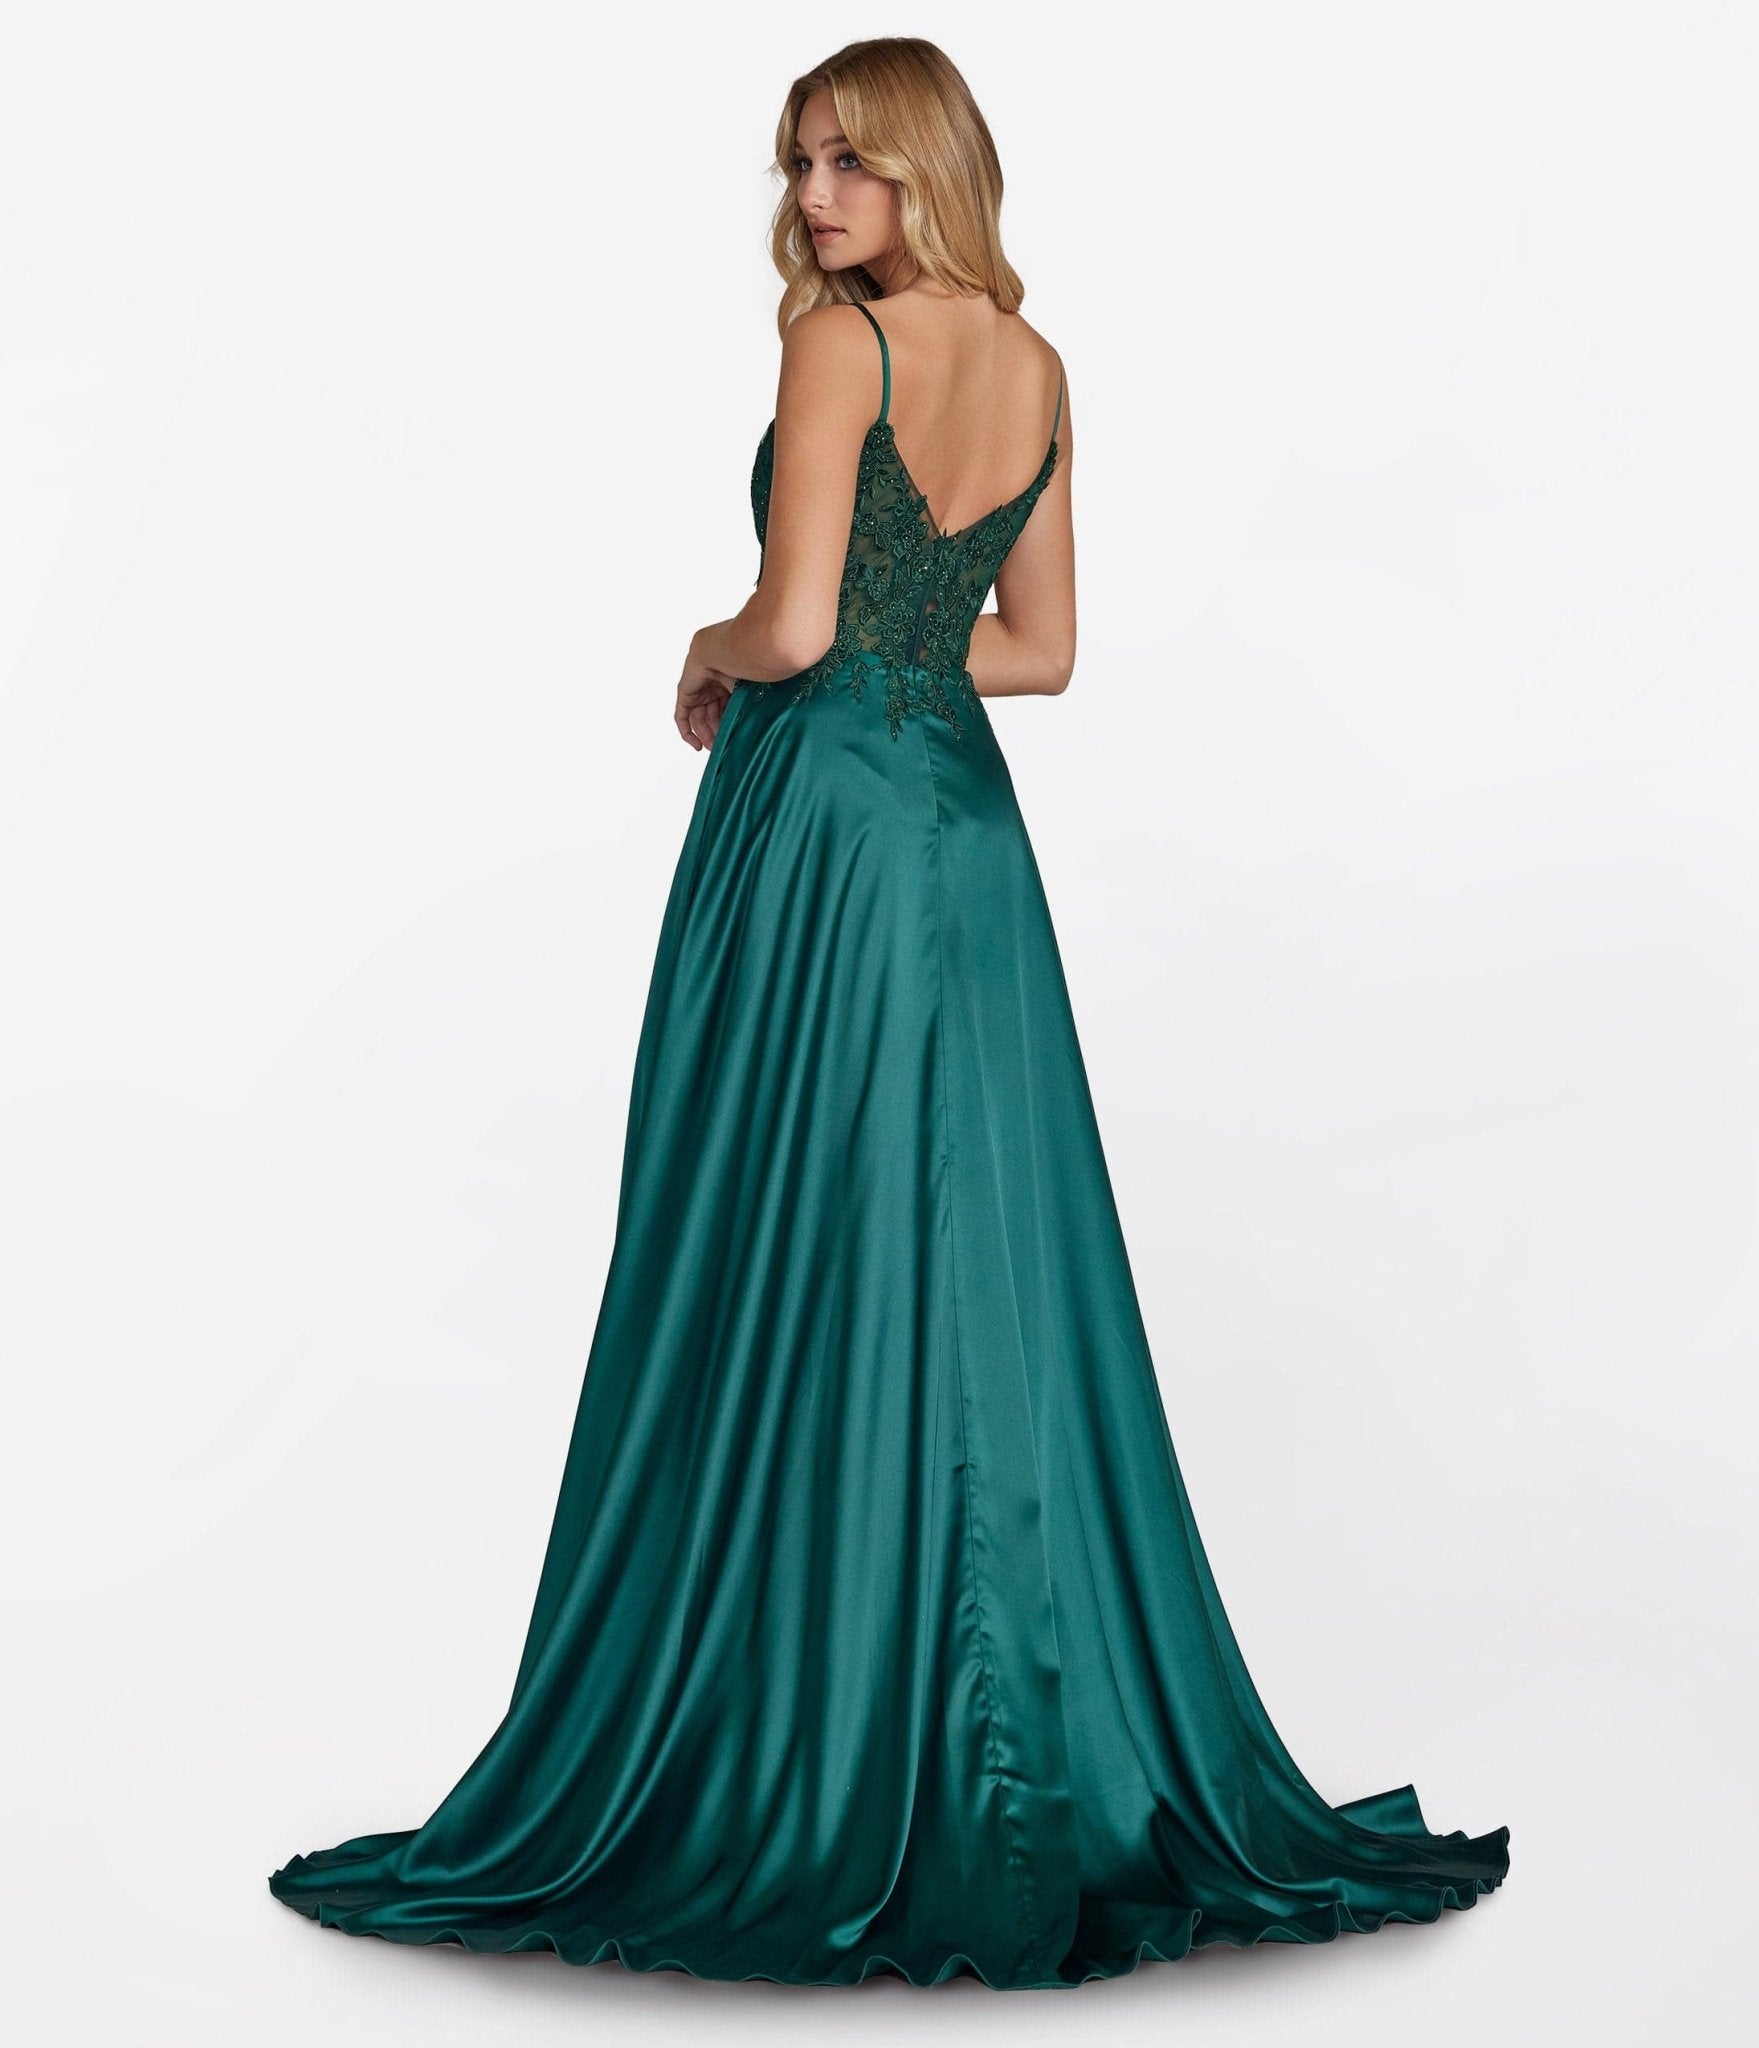 Emerald Floral Lace & Satin Prom Dress - Unique Vintage - Womens, DRESSES, PROM AND SPECIAL OCCASION